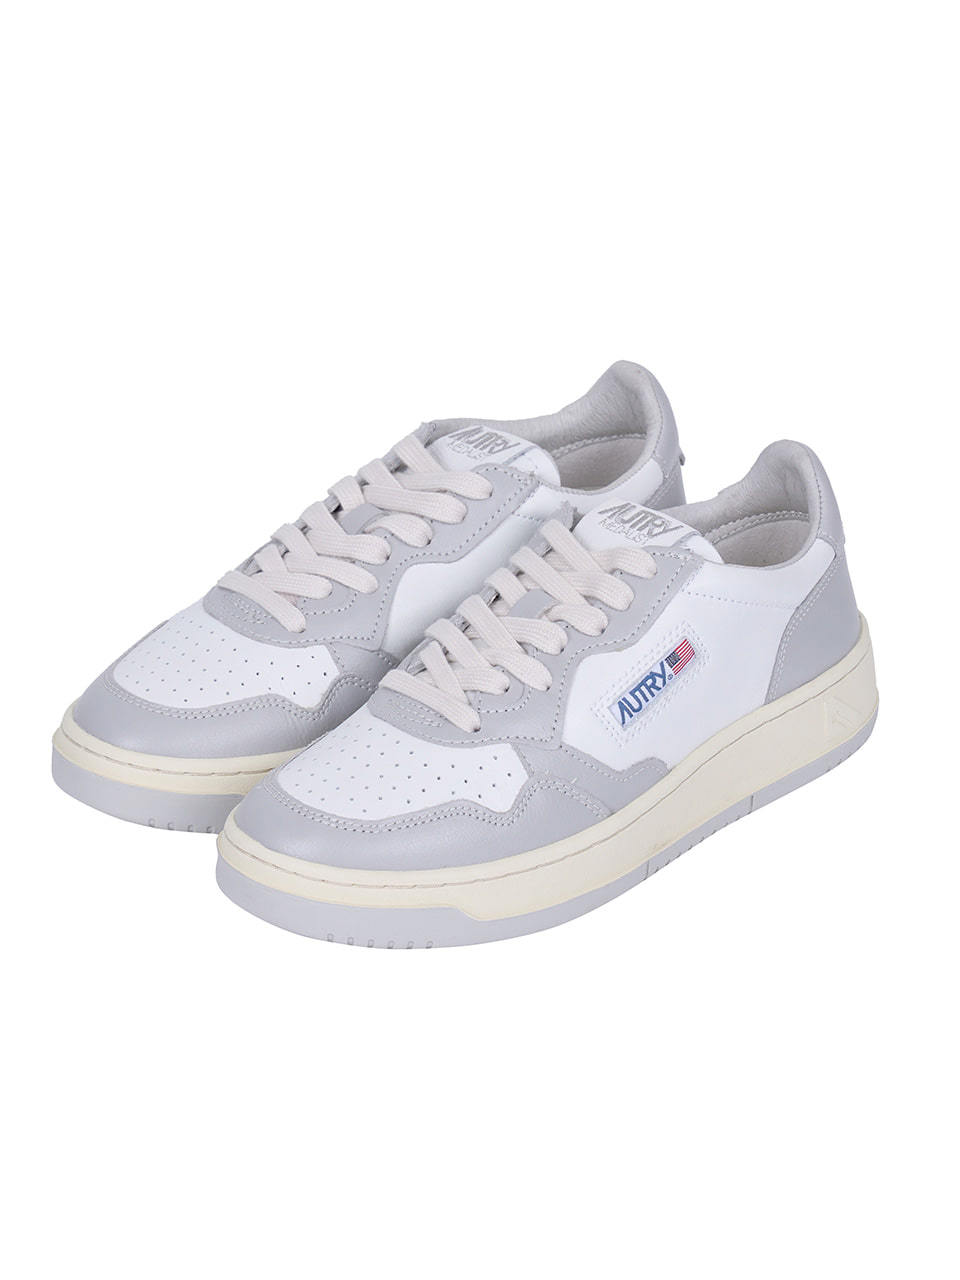 AUTRY - MEDALIST LEATHER SNEAKERS (VAPOR GRAY)